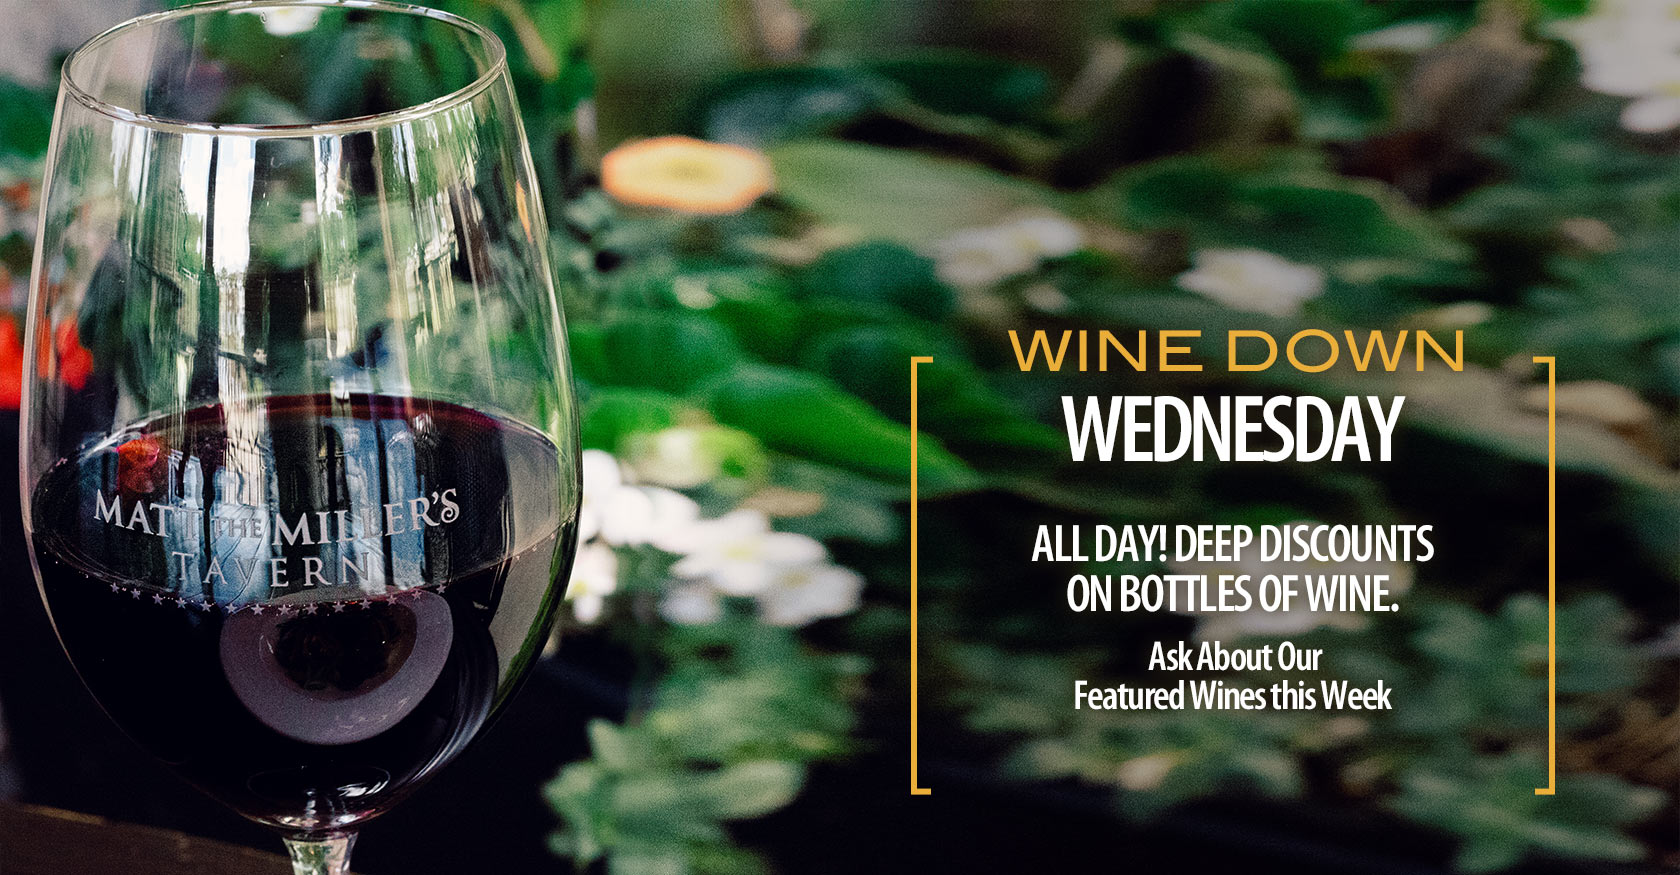 Wine Down Wednesday. All day! Deep discounts on bottles of wine. Ask about our featured wines this week.